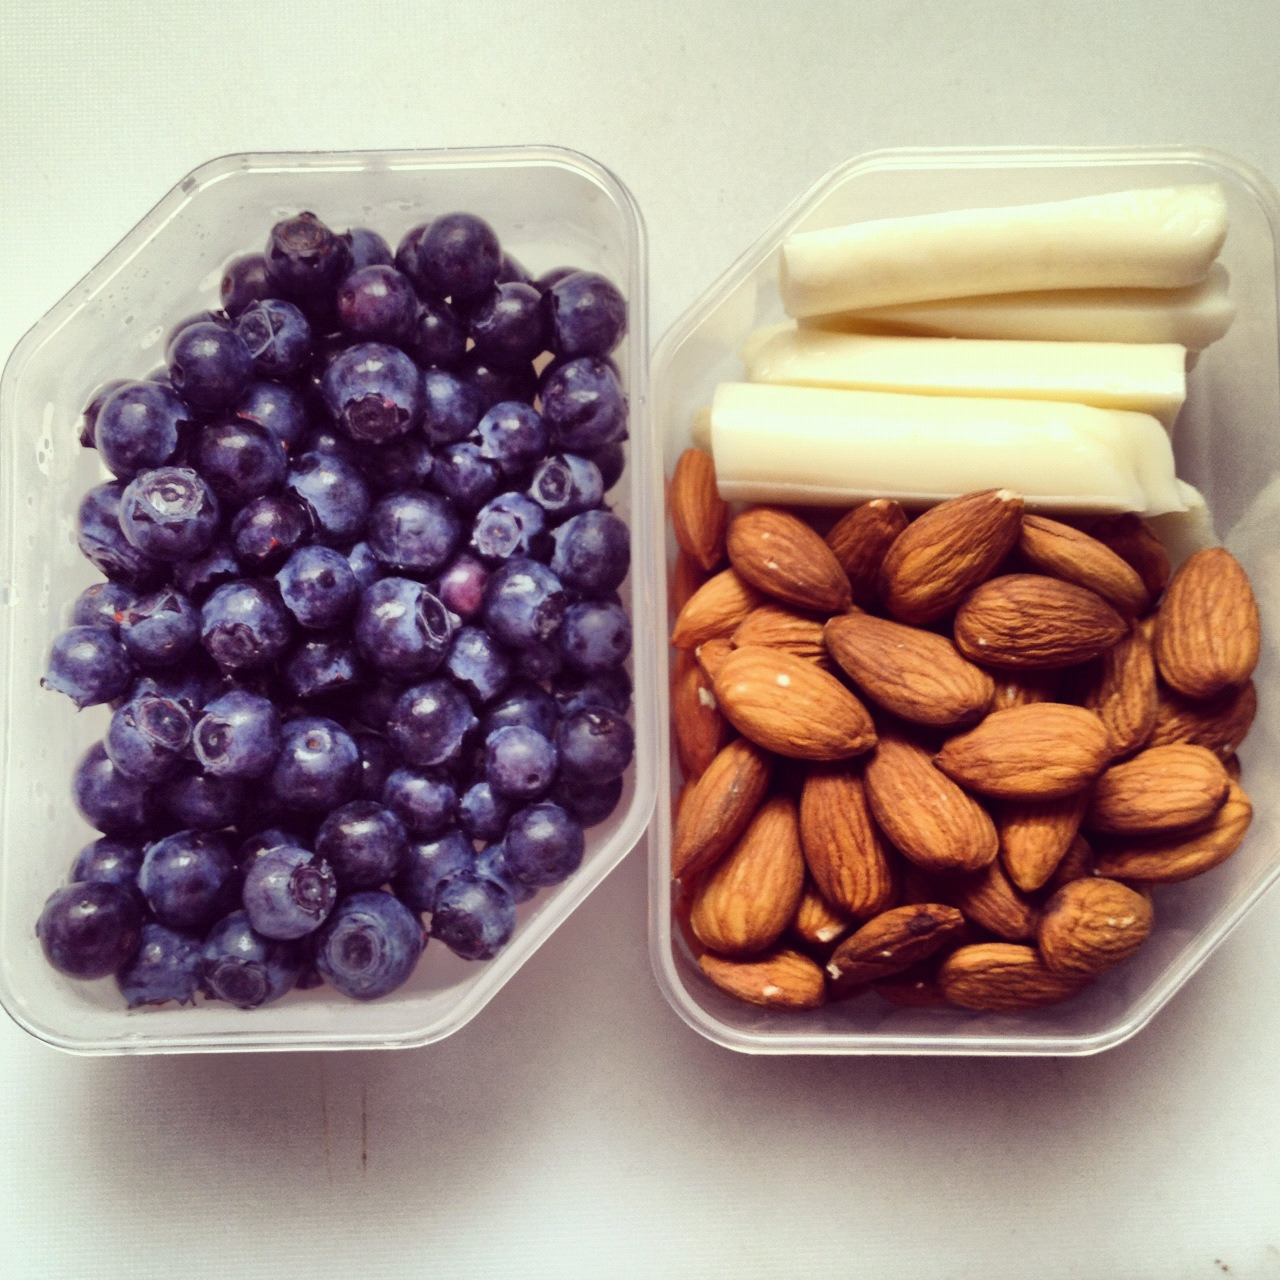 thefitvixen: Packing yummy, healthy snacks for my road trip to San Diego!! Have a good weekend everyone! And thank you for being so inspirational!!! 